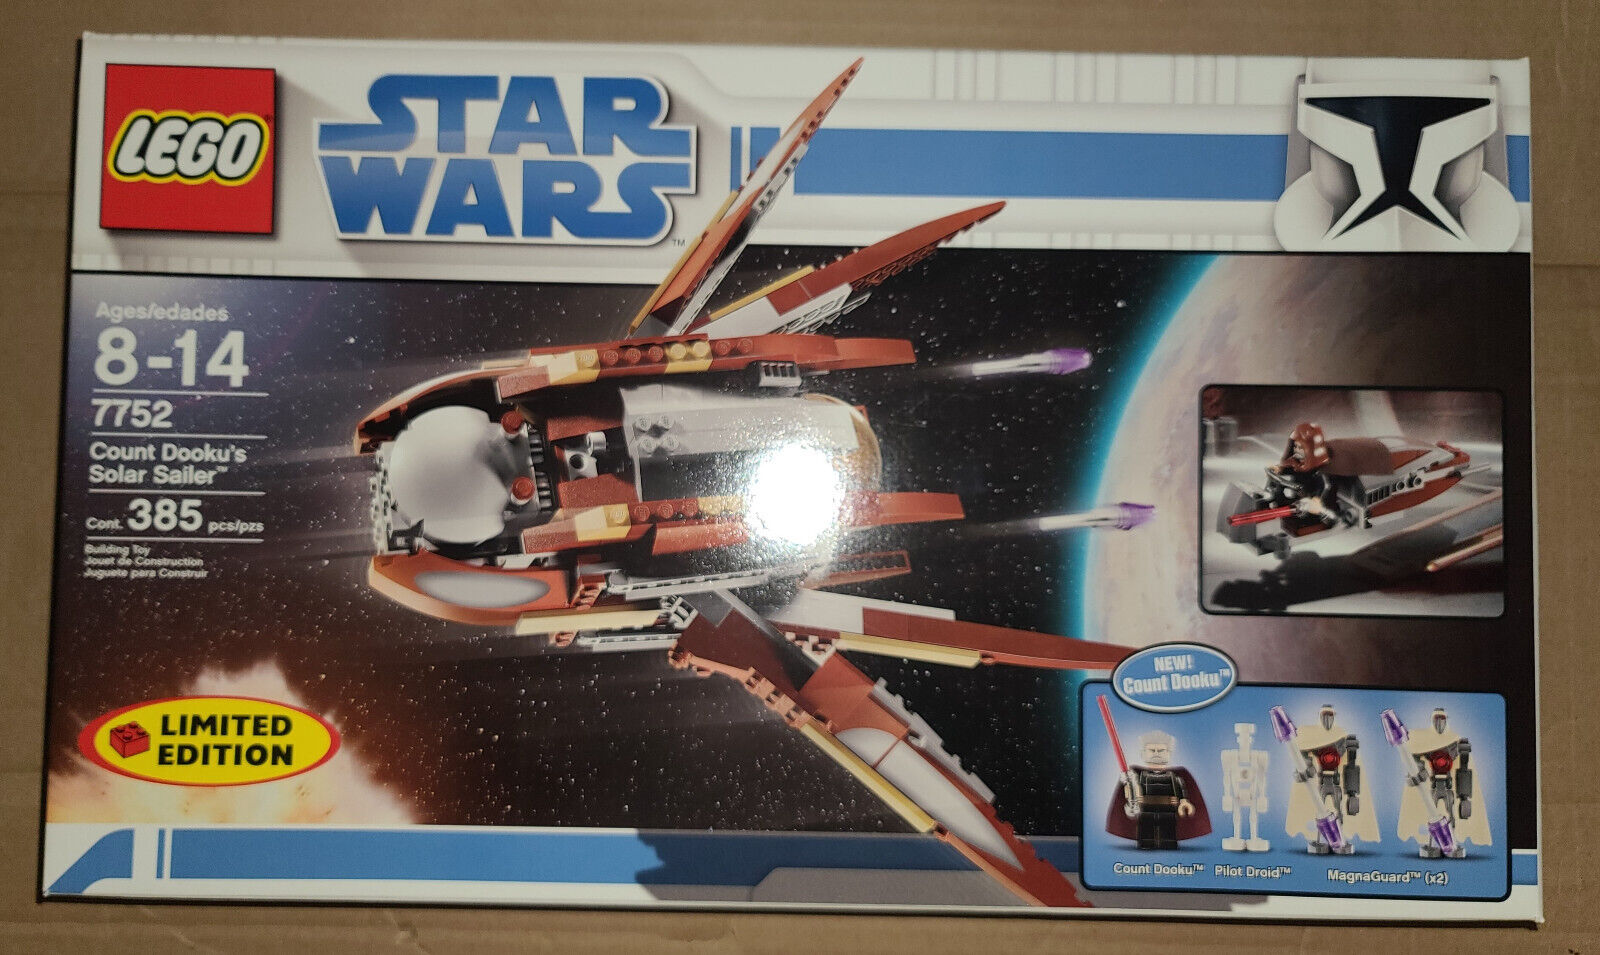 Star Wars LEGO 7752, Count Dooku's Solar Sailer, Limited Edition, New, Sealed